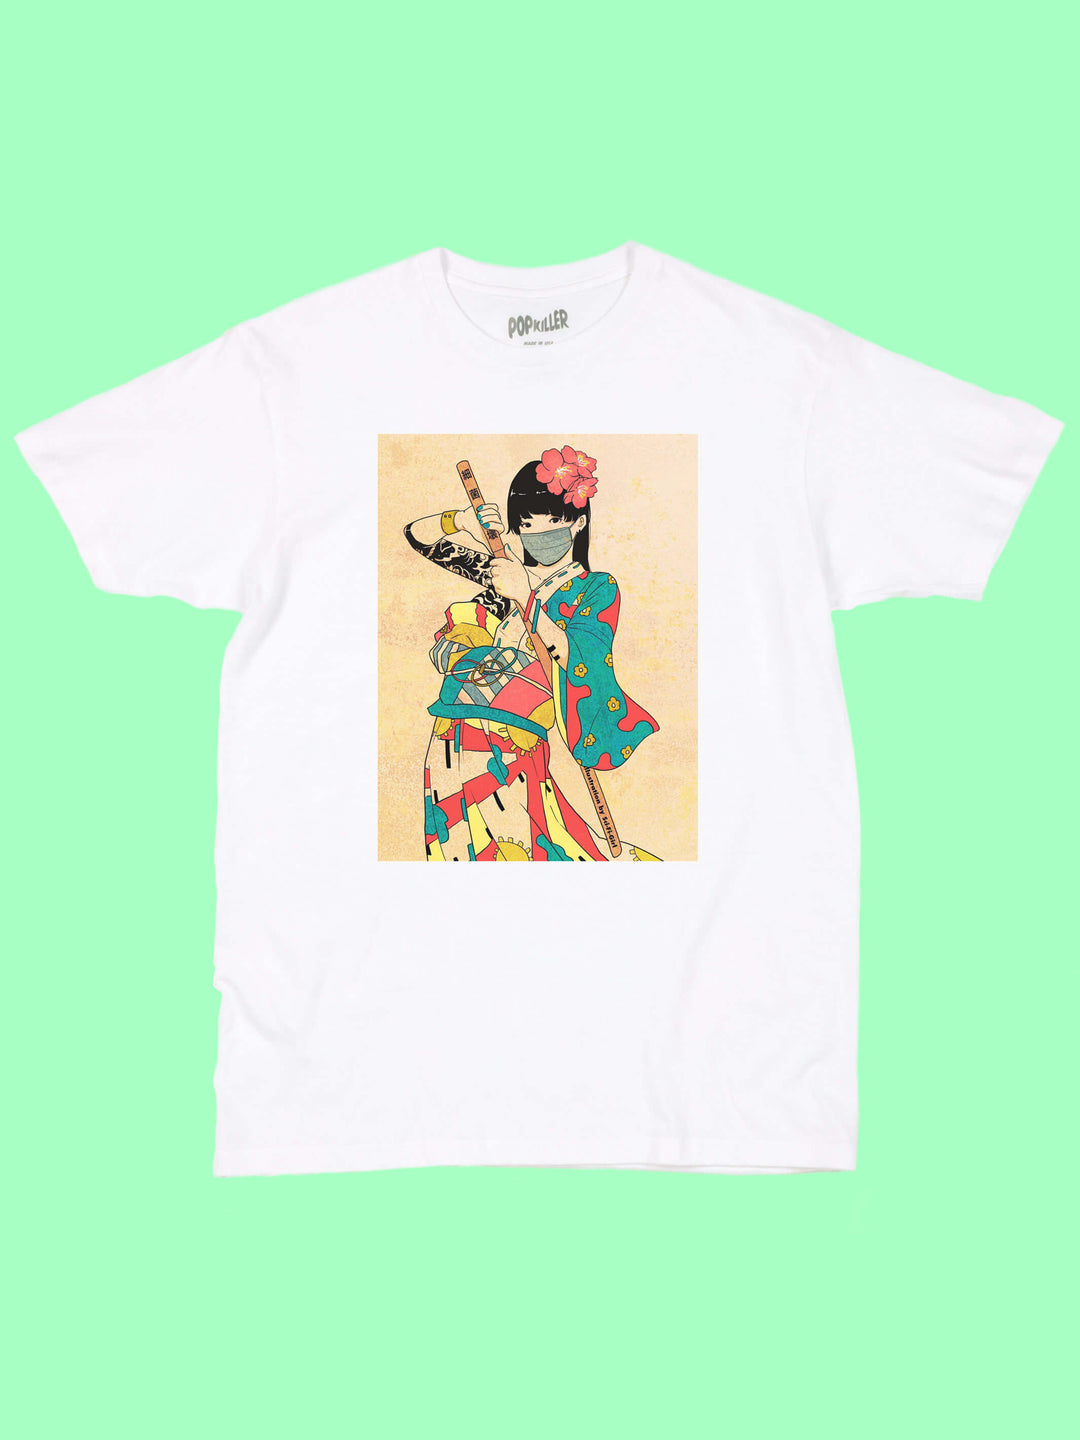 COVID mask up graphic t-shirt.